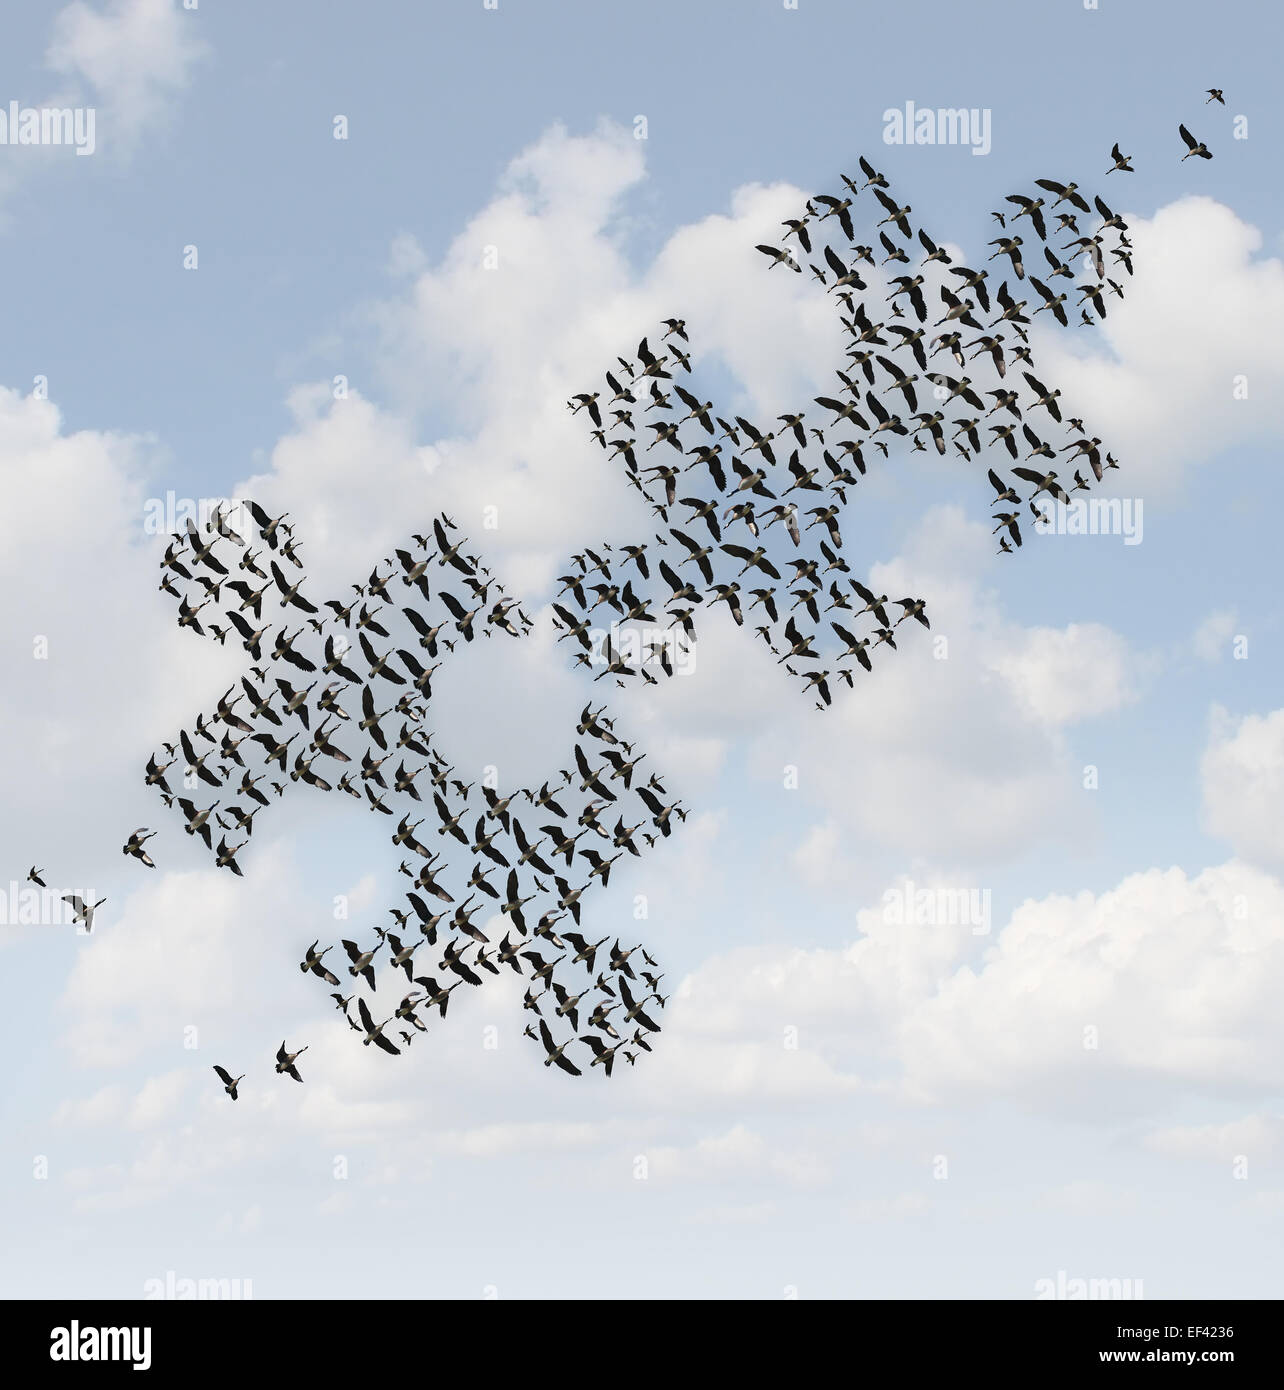 Flying birds puzzle as a business concept for group strategy as two flocks of geese shaped as jigsaw puzzle pieces comming together as a teamwork success metaphor. Stock Photo